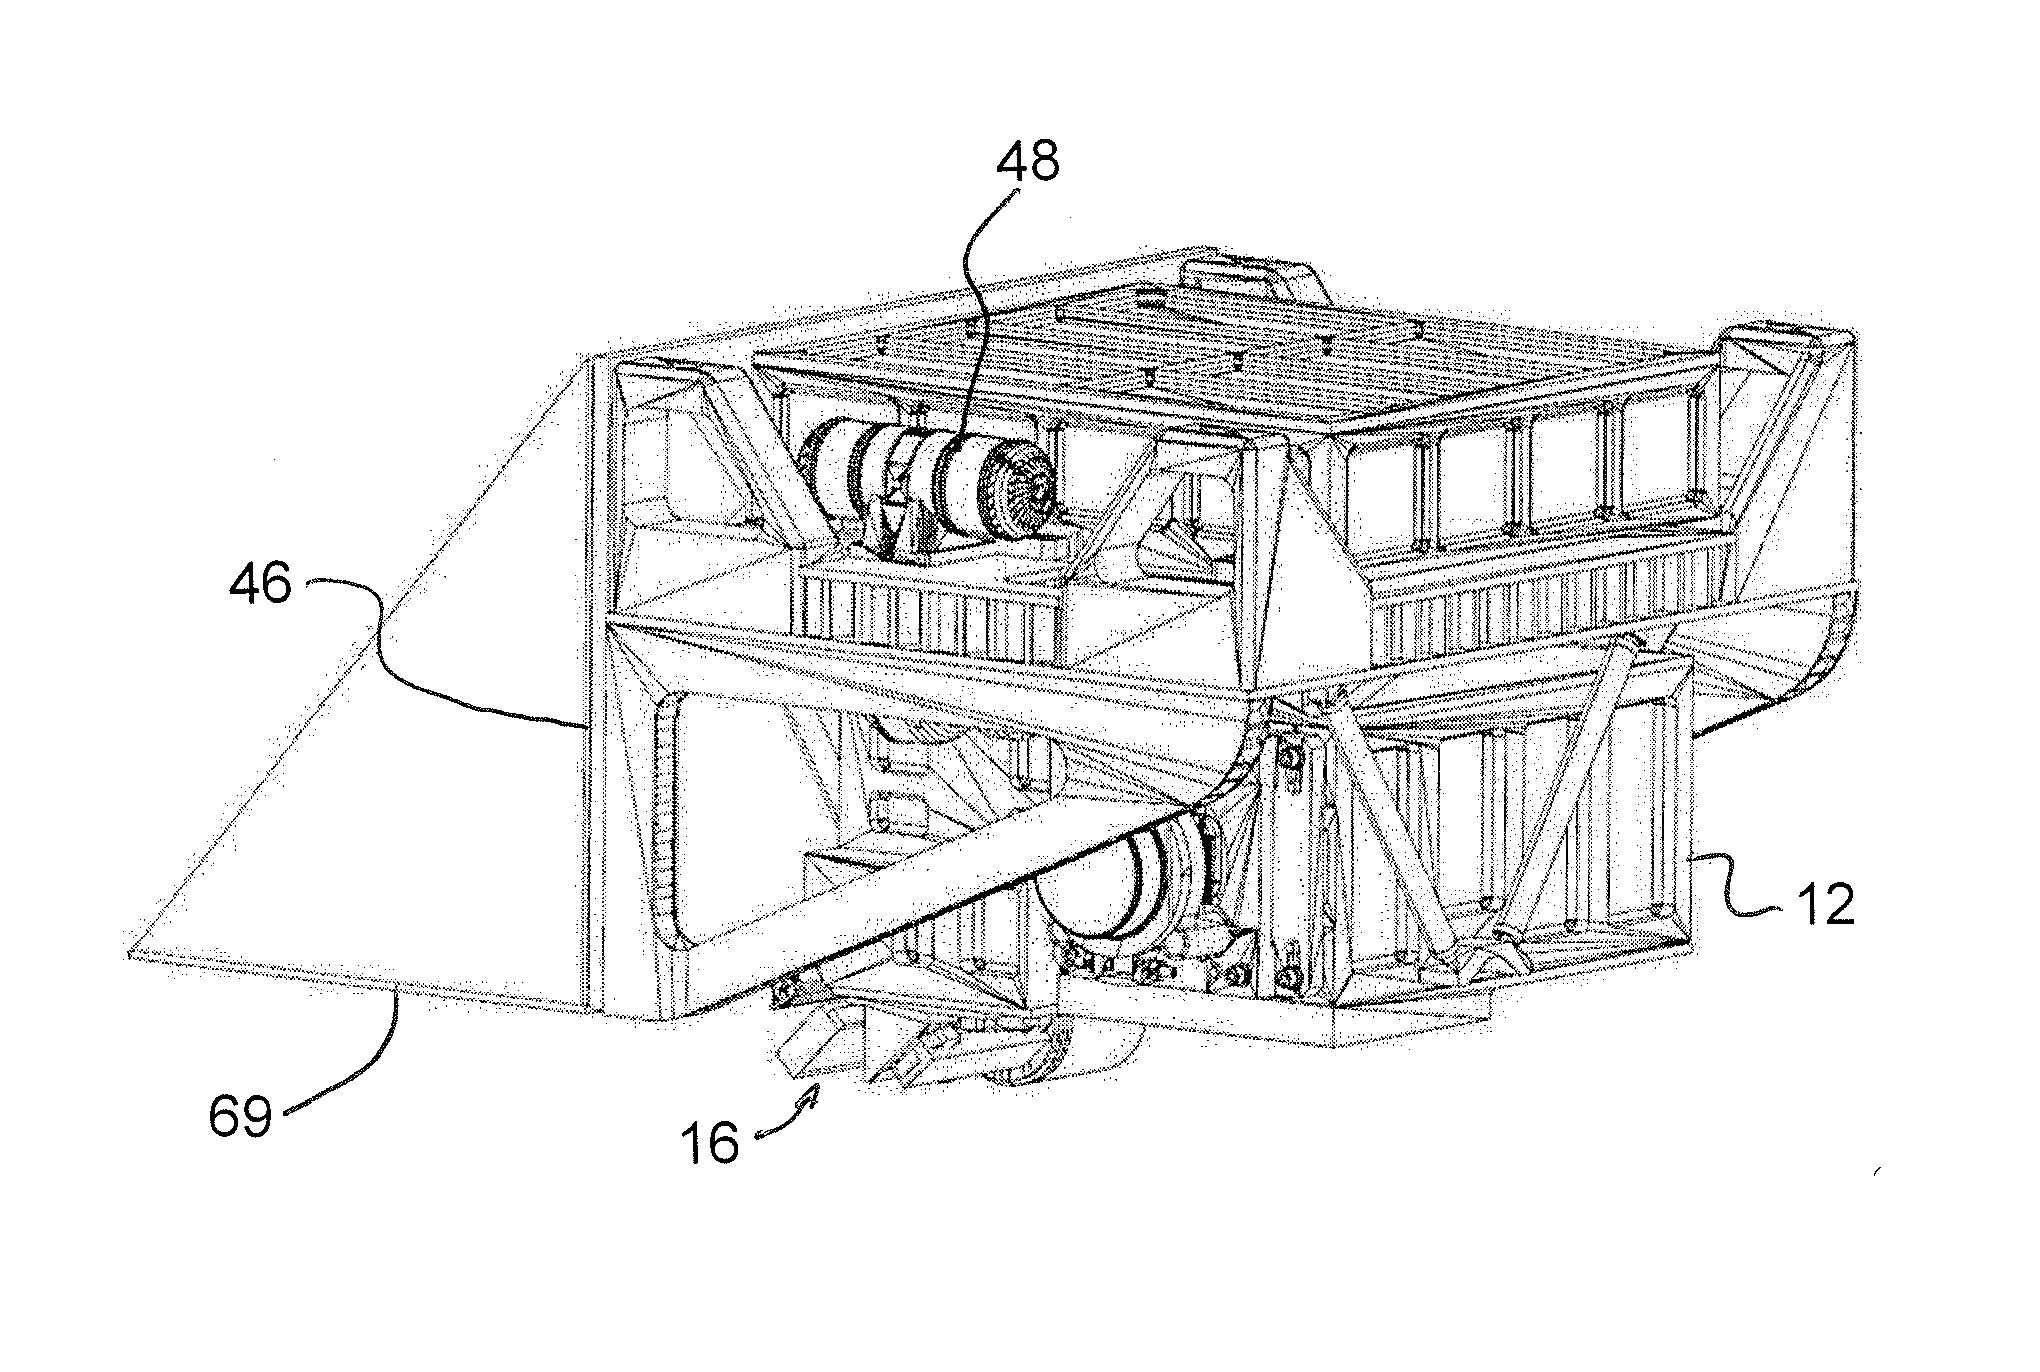 Device and method for making weather observations using infrared spectral radiometry